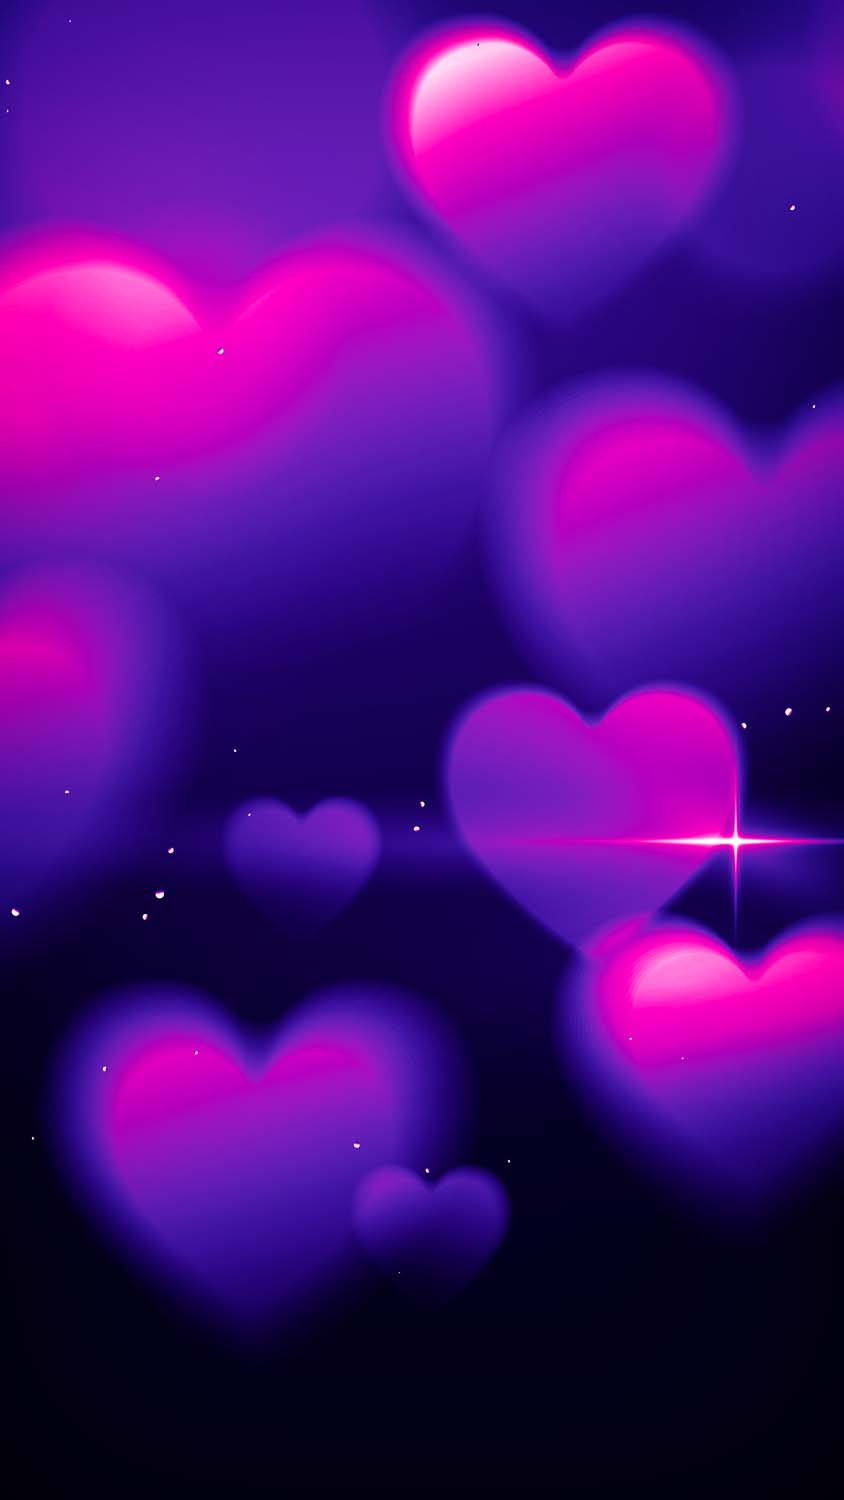 Love Is In Air IPhone Wallpaper HD - IPhone Wallpapers : iPhone Wallpapers